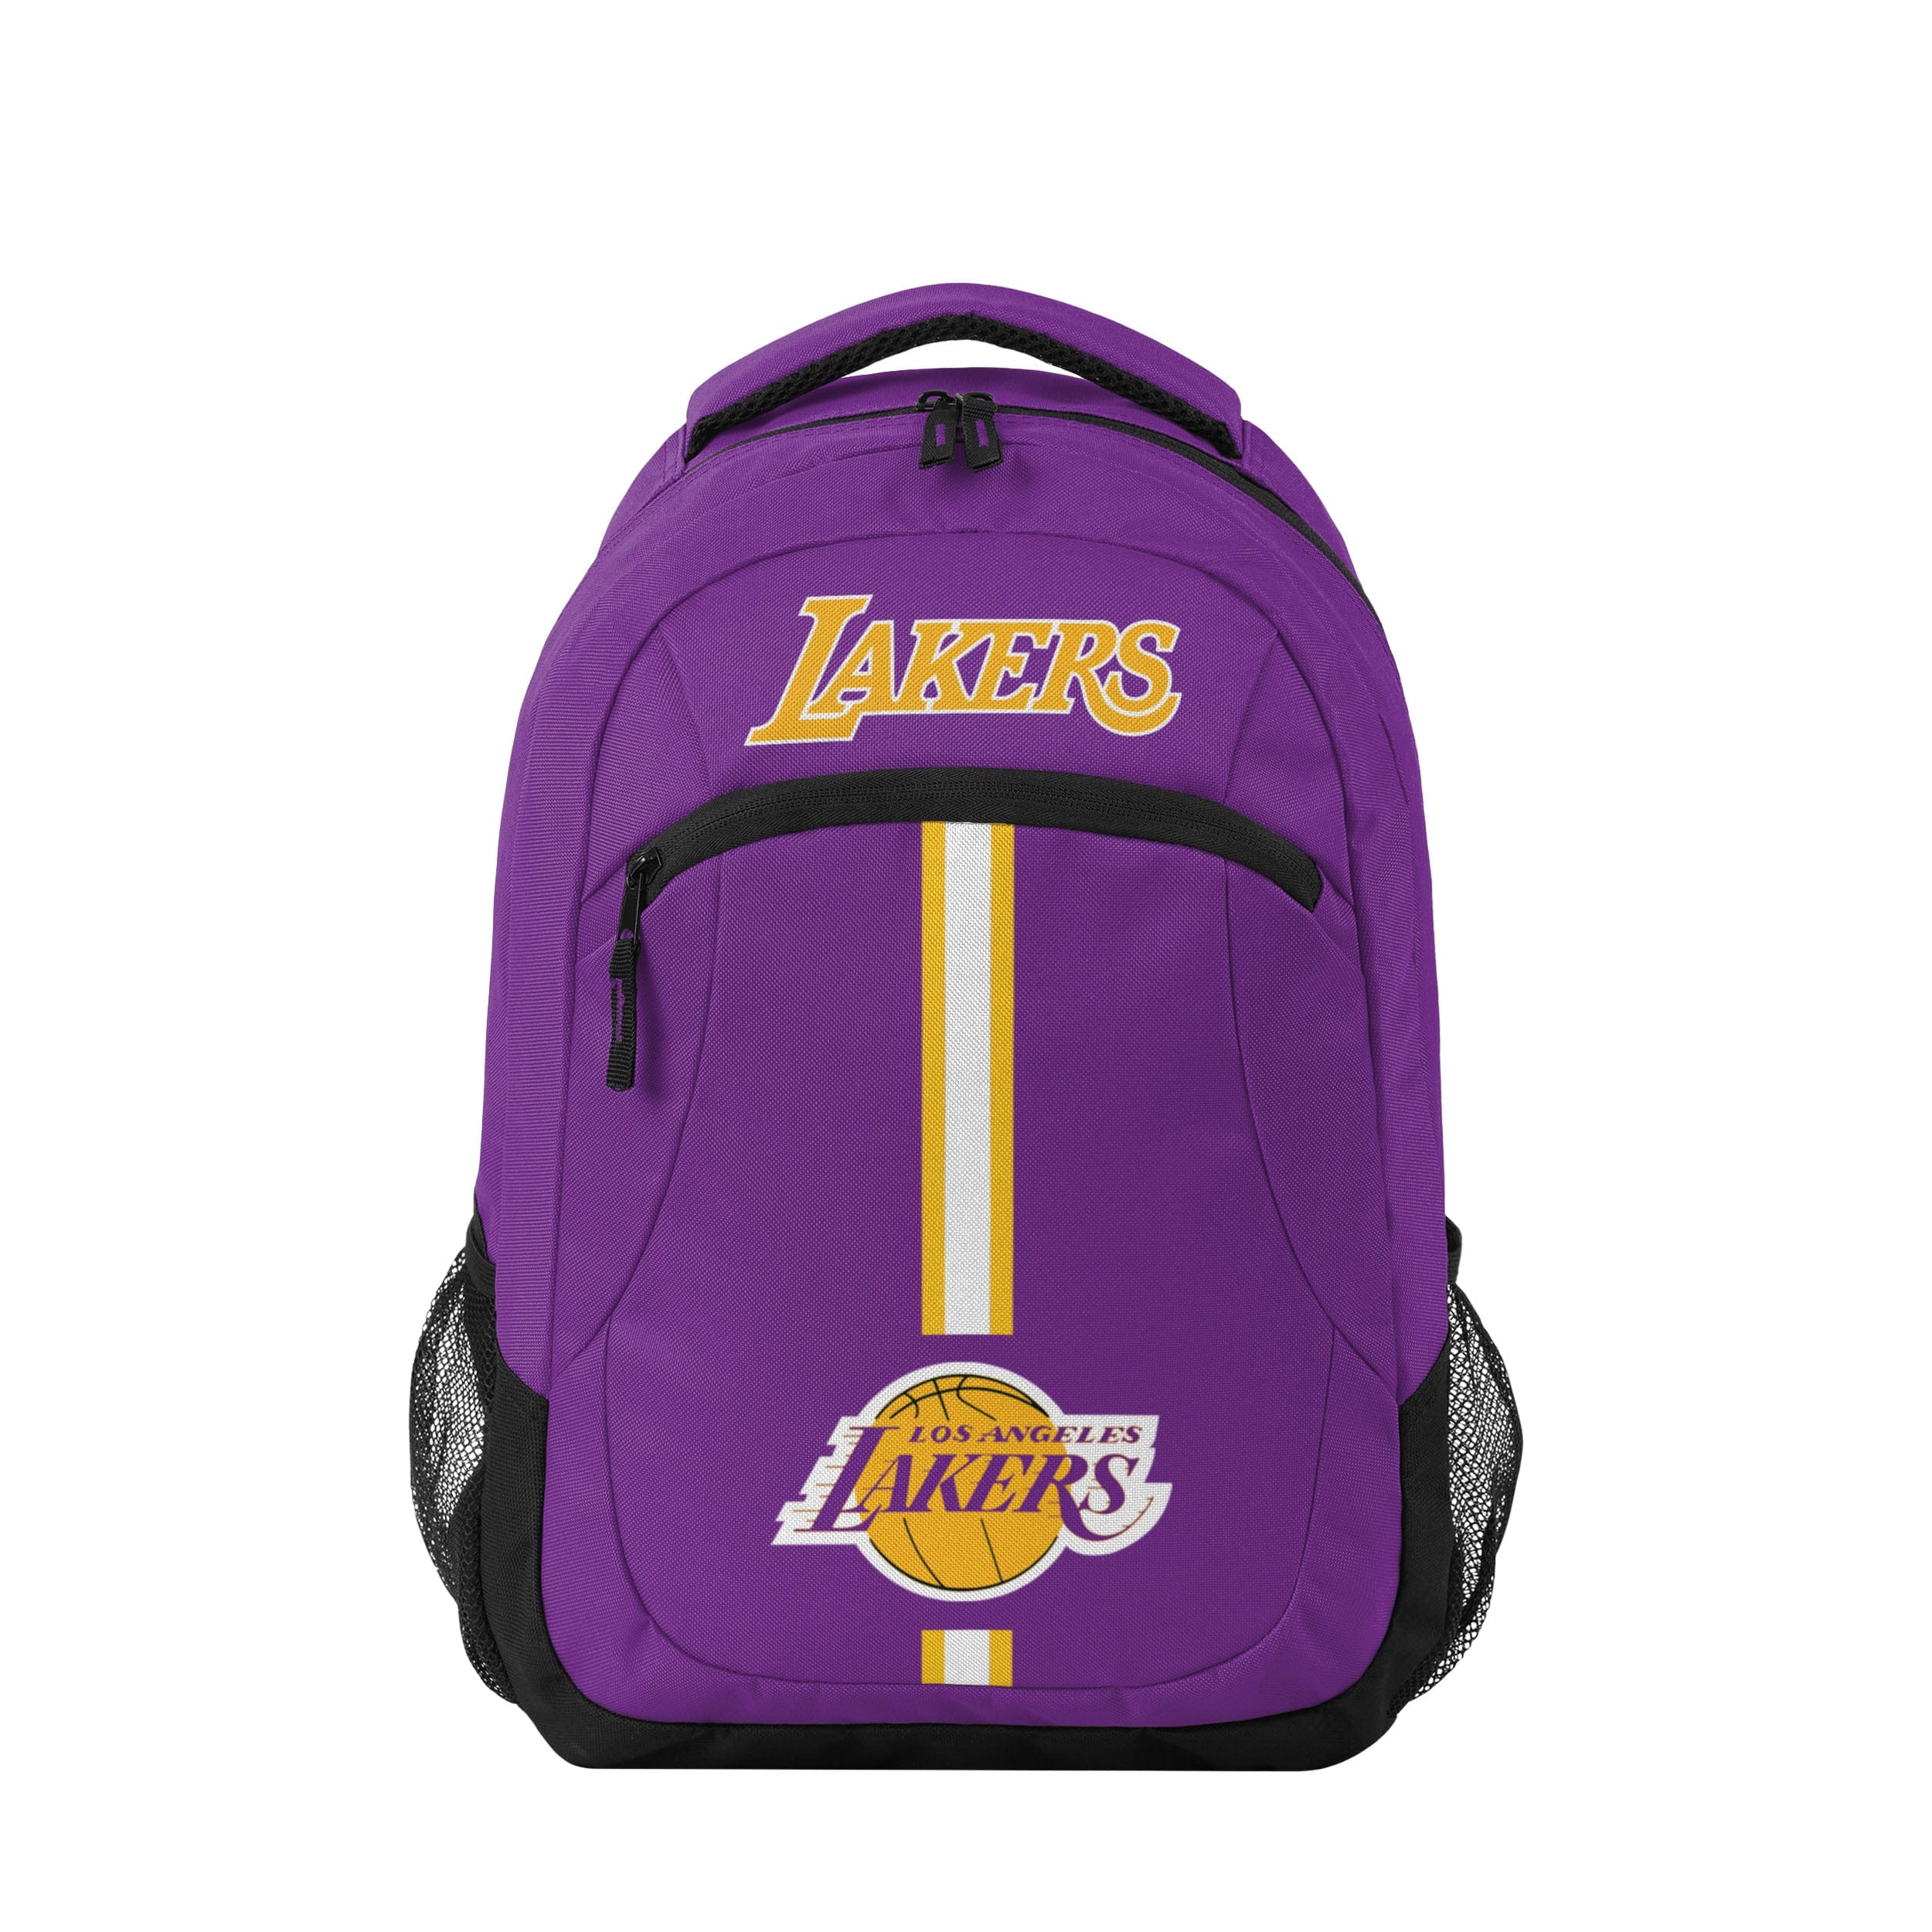 Los Angeles Lakers - Road Trip 2.0 Basketball Backpack - POINT 3 Basketball